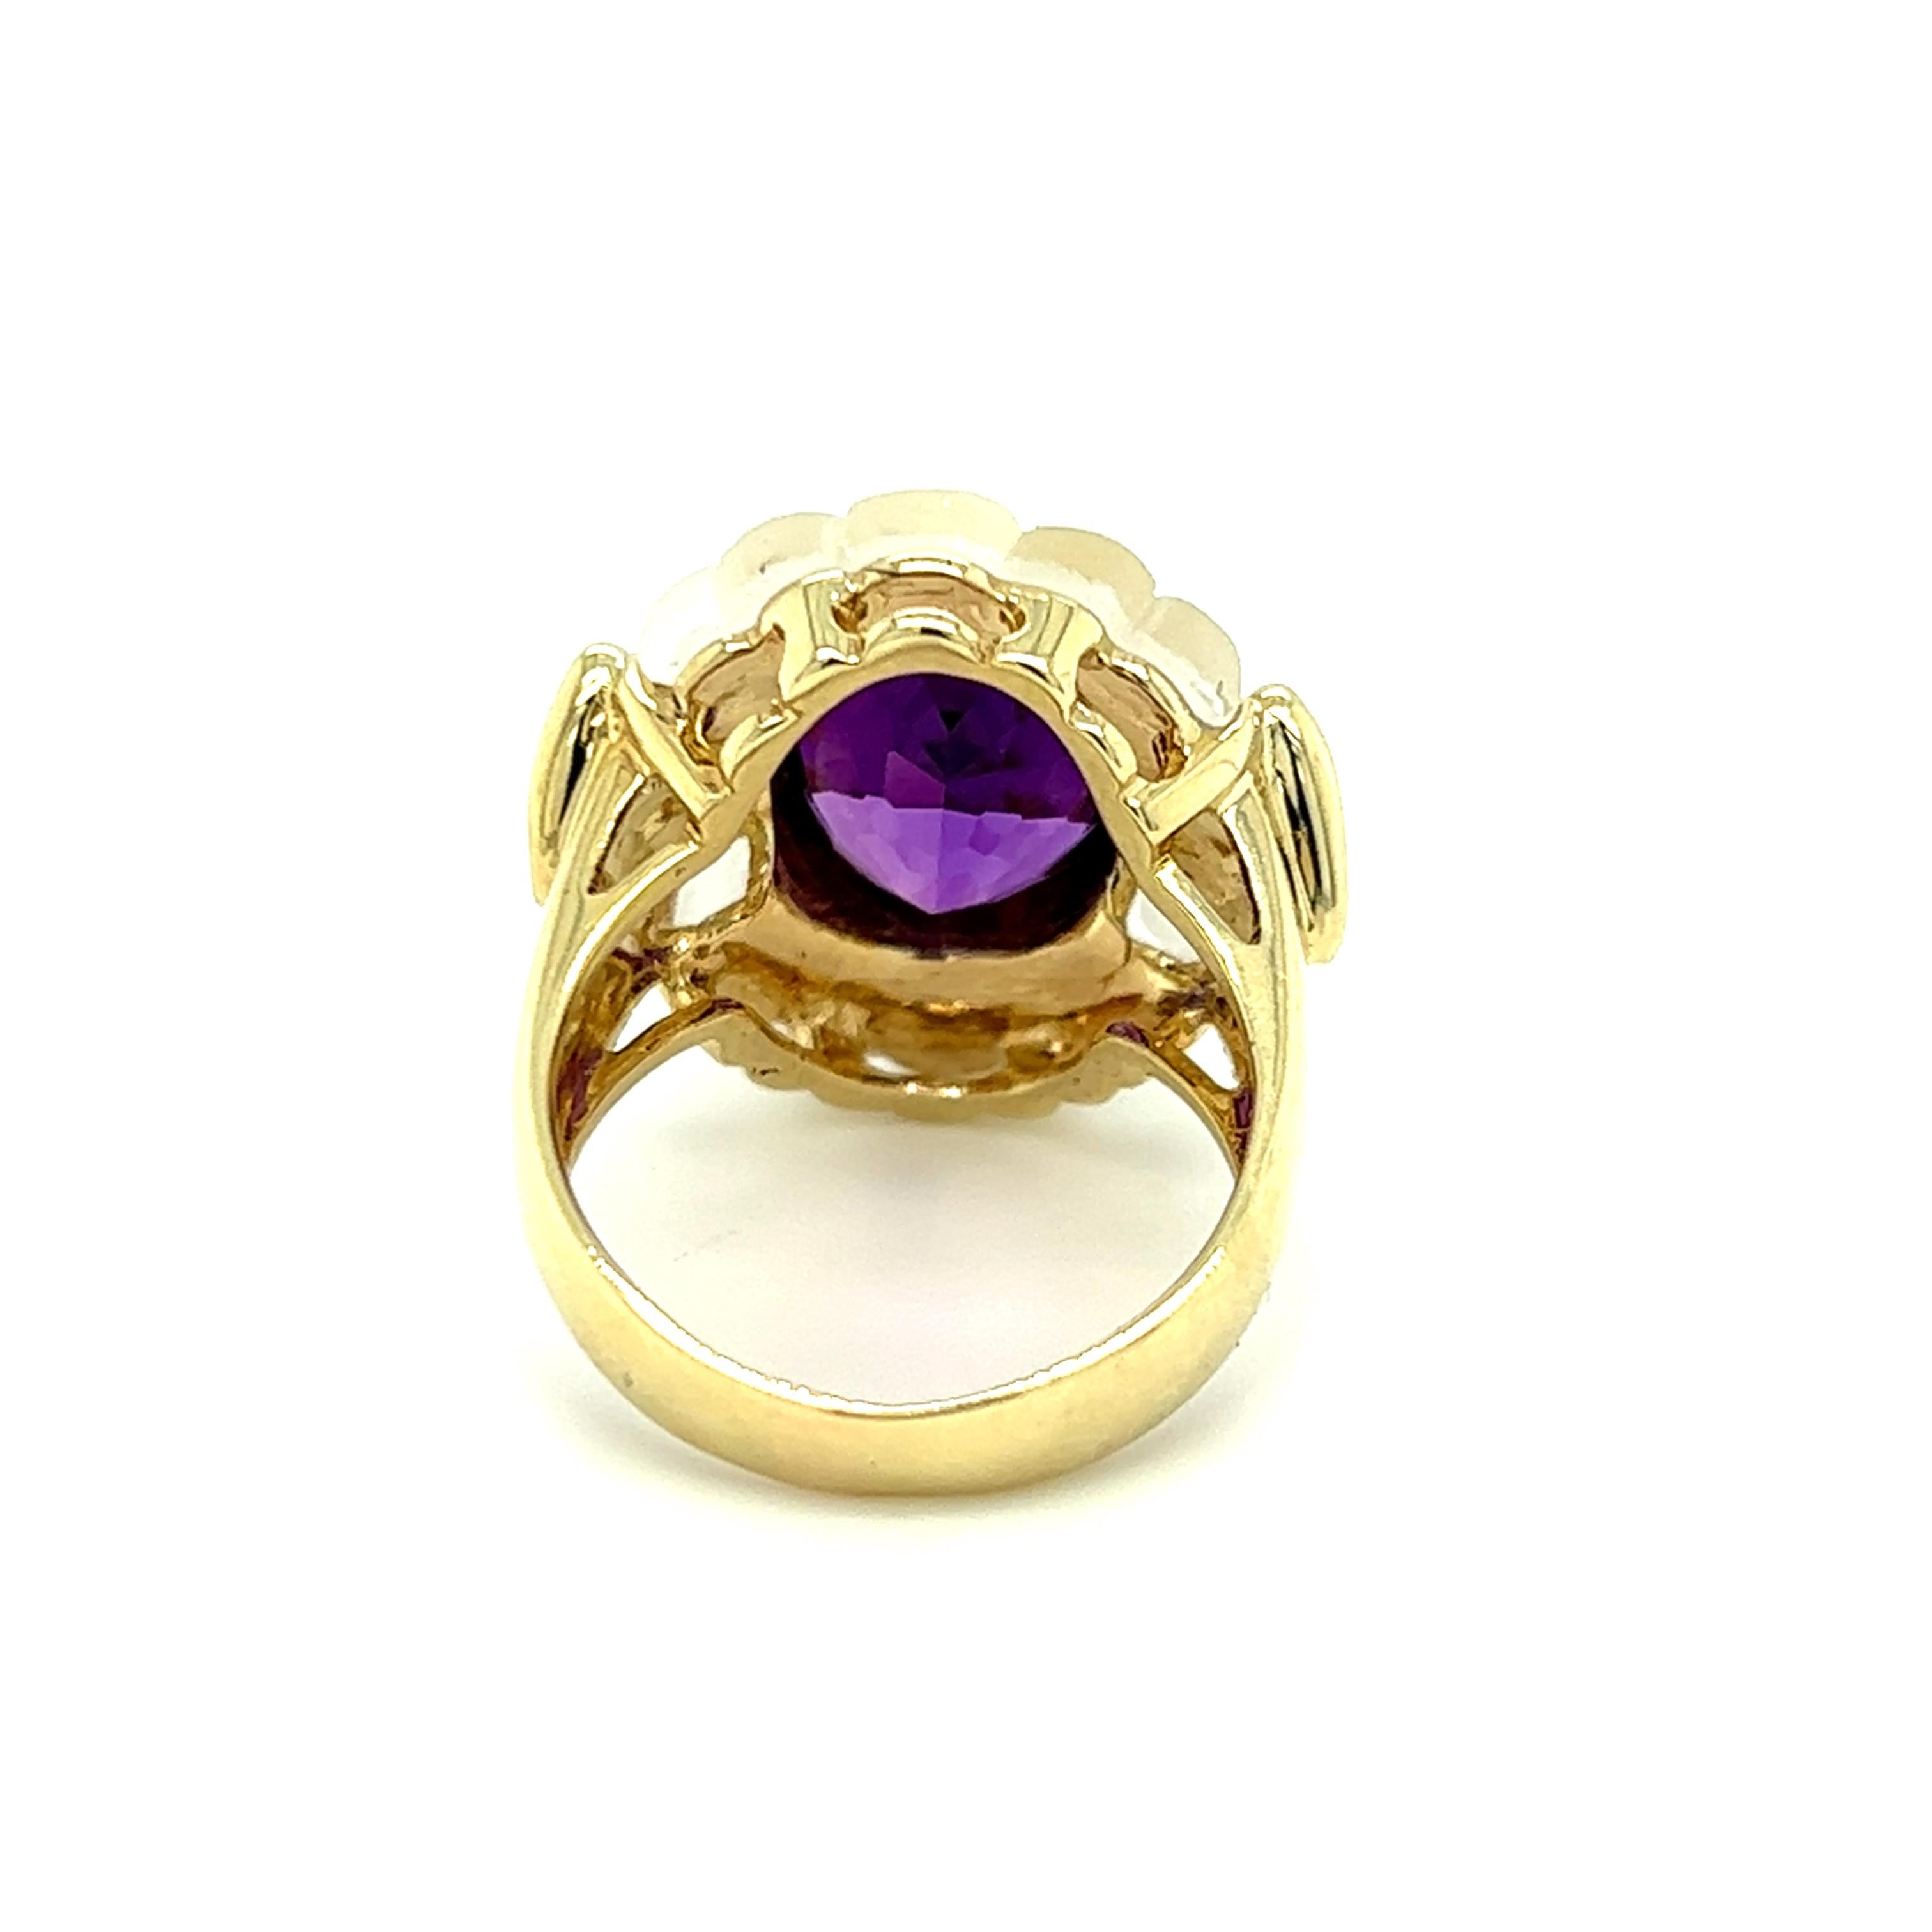 One 14 karat yellow gold ring bezel set with one 11x9mm oval amethyst, two carved white glass crystals, and eight (8) round brilliant cut diamonds, approximately 0.16 carat total weight with matching H/I color and SI1 clarity. The ring is stamped